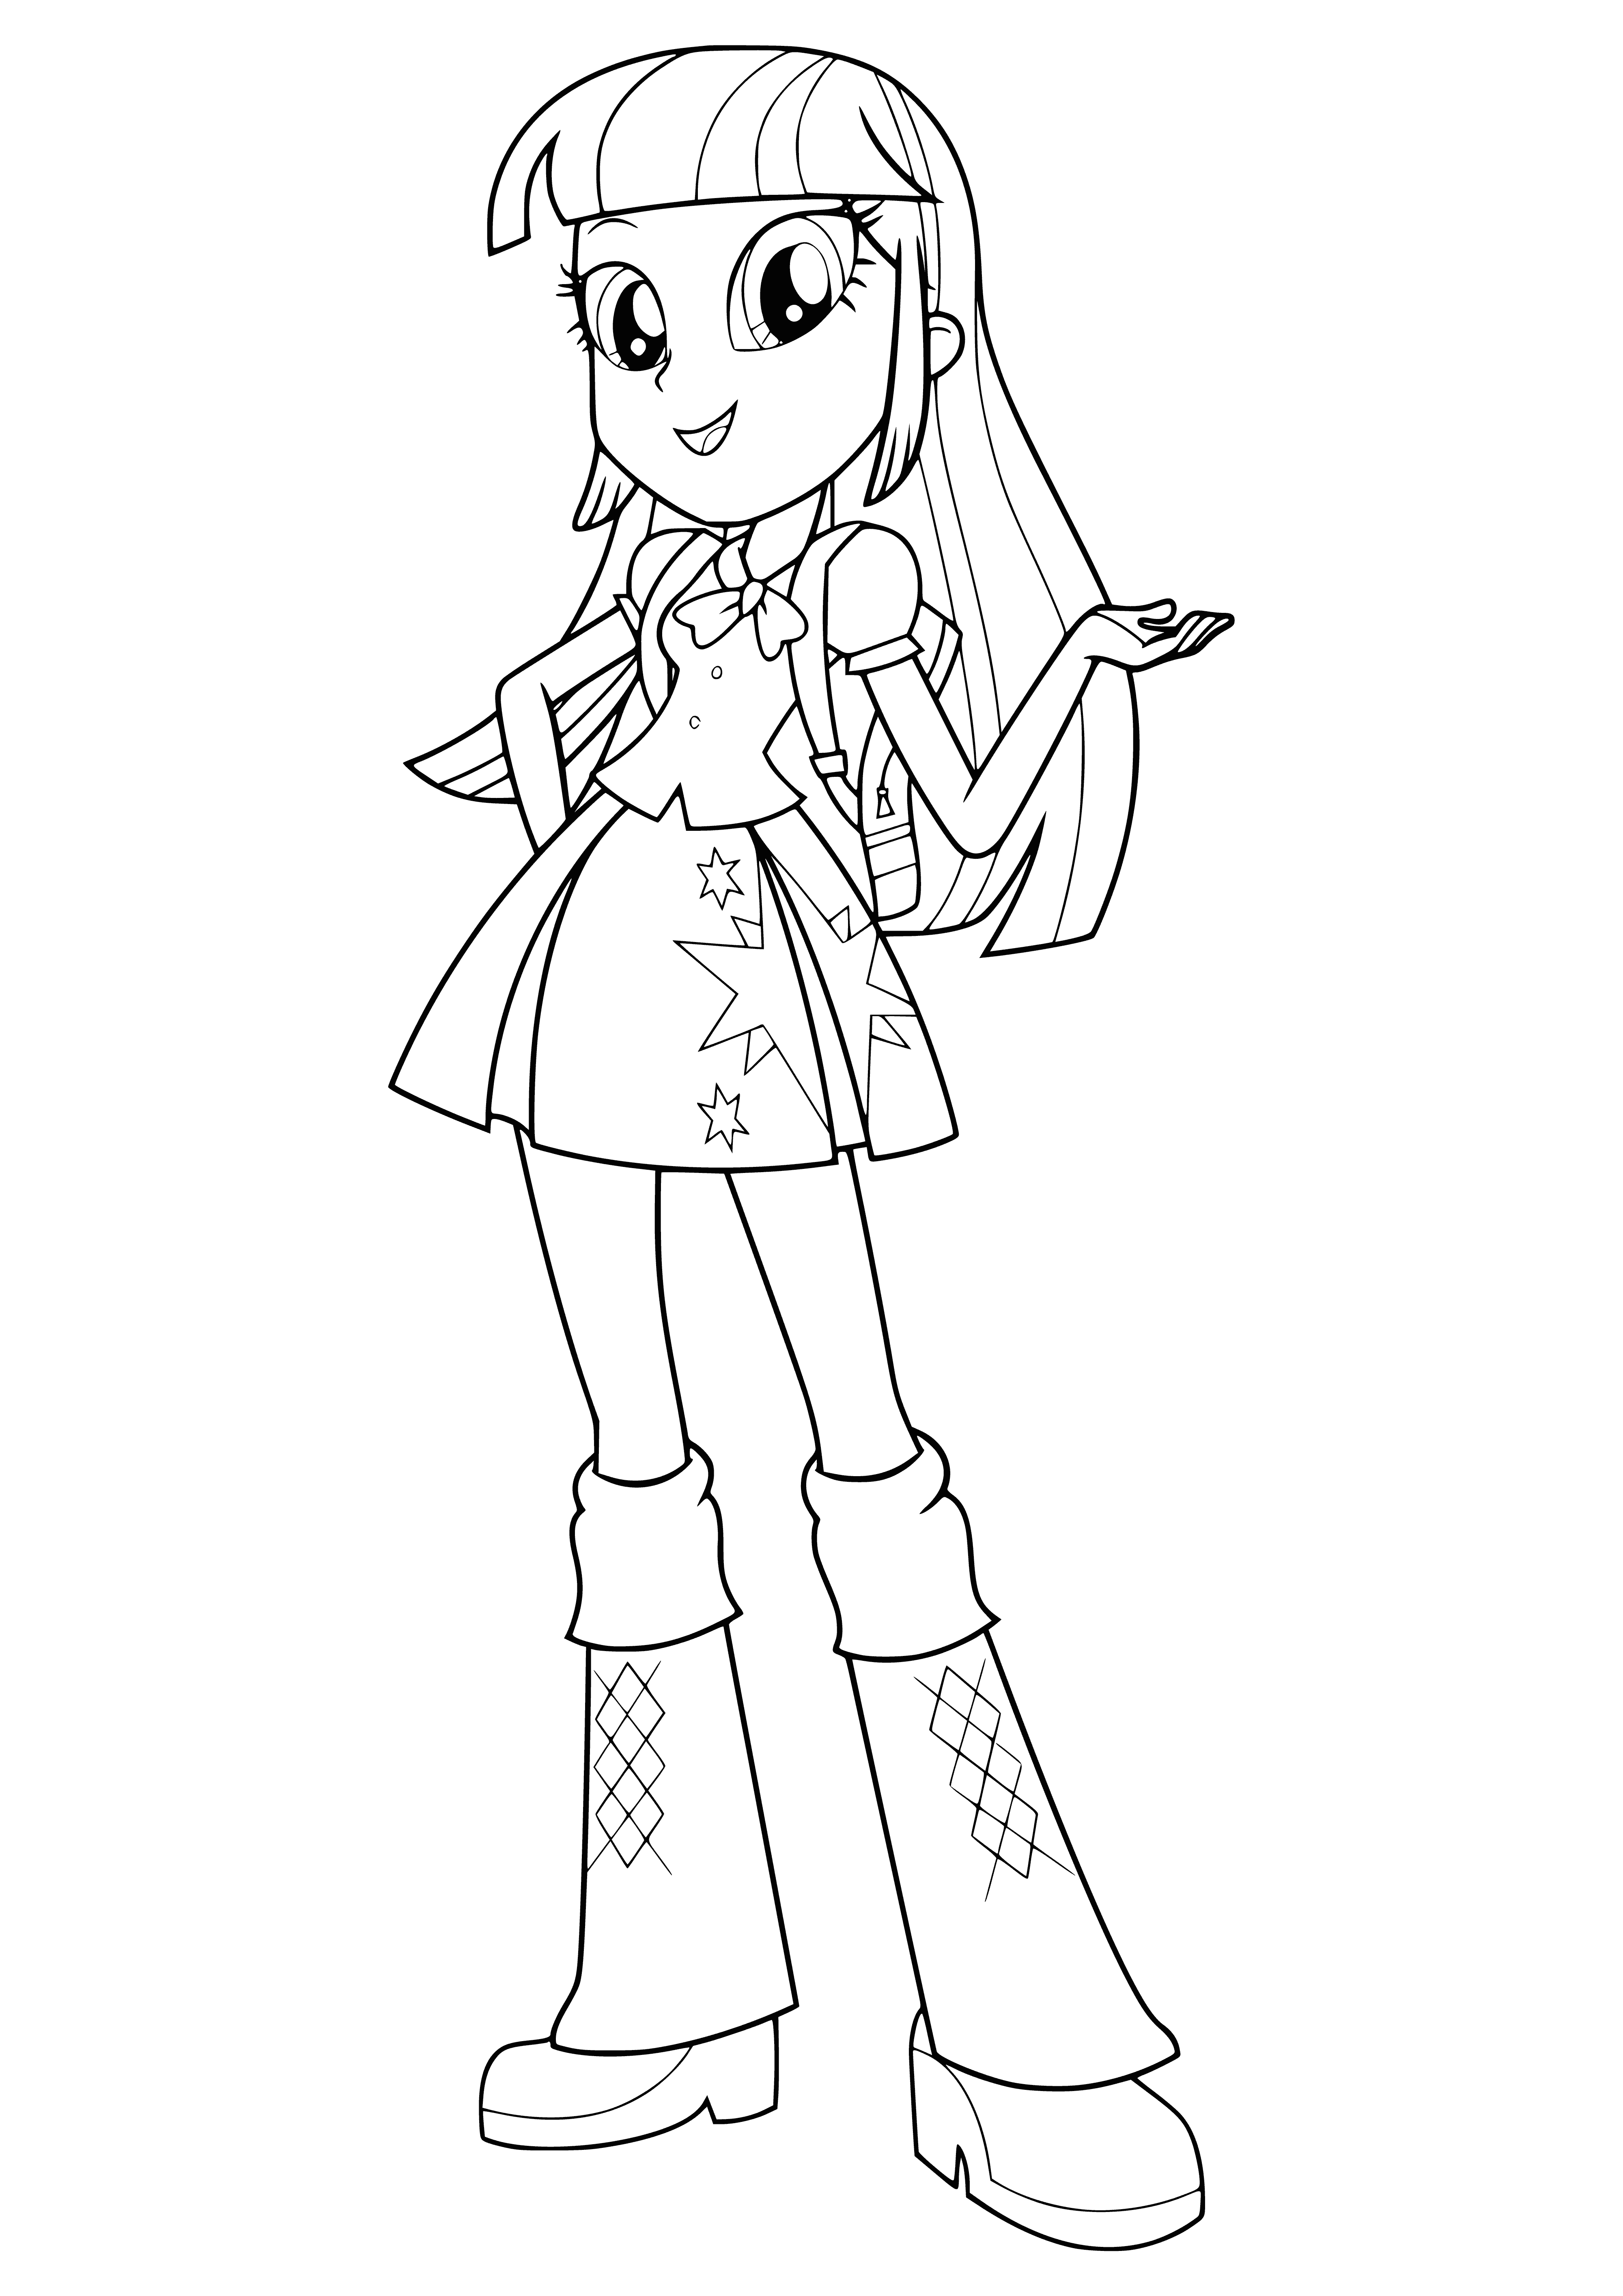 coloring page: Girl with long, sparkly purple hair and pink headband stands in front of bookshelf. Wearing a pink tank, purple and white striped skirt, and sneakers with purple and white socks and bracelet. #coloringpage